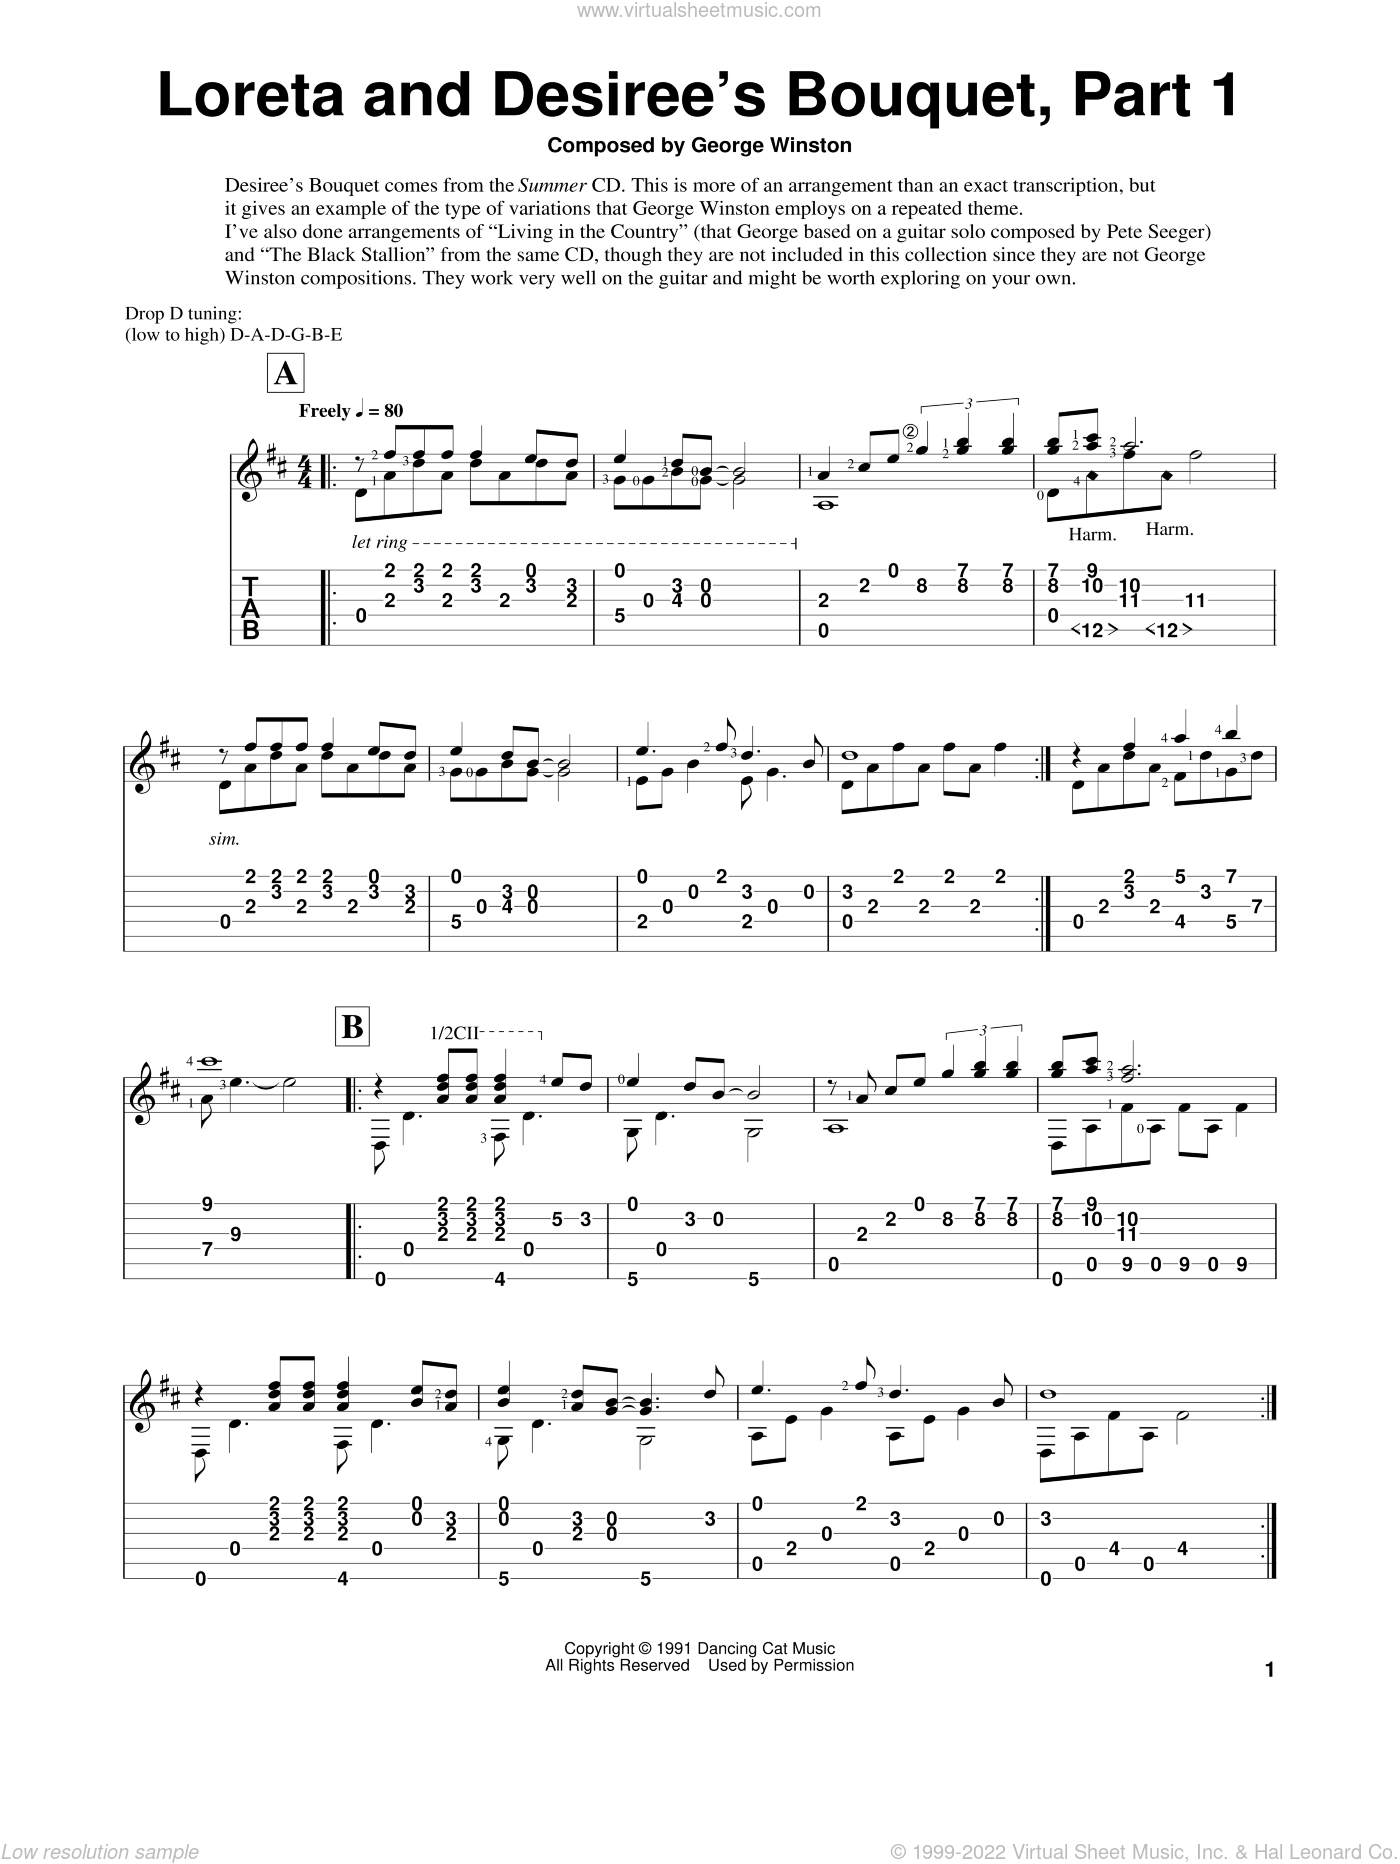 Loreta And Desiree's Bouquet-Part 1 sheet music for guitar solo